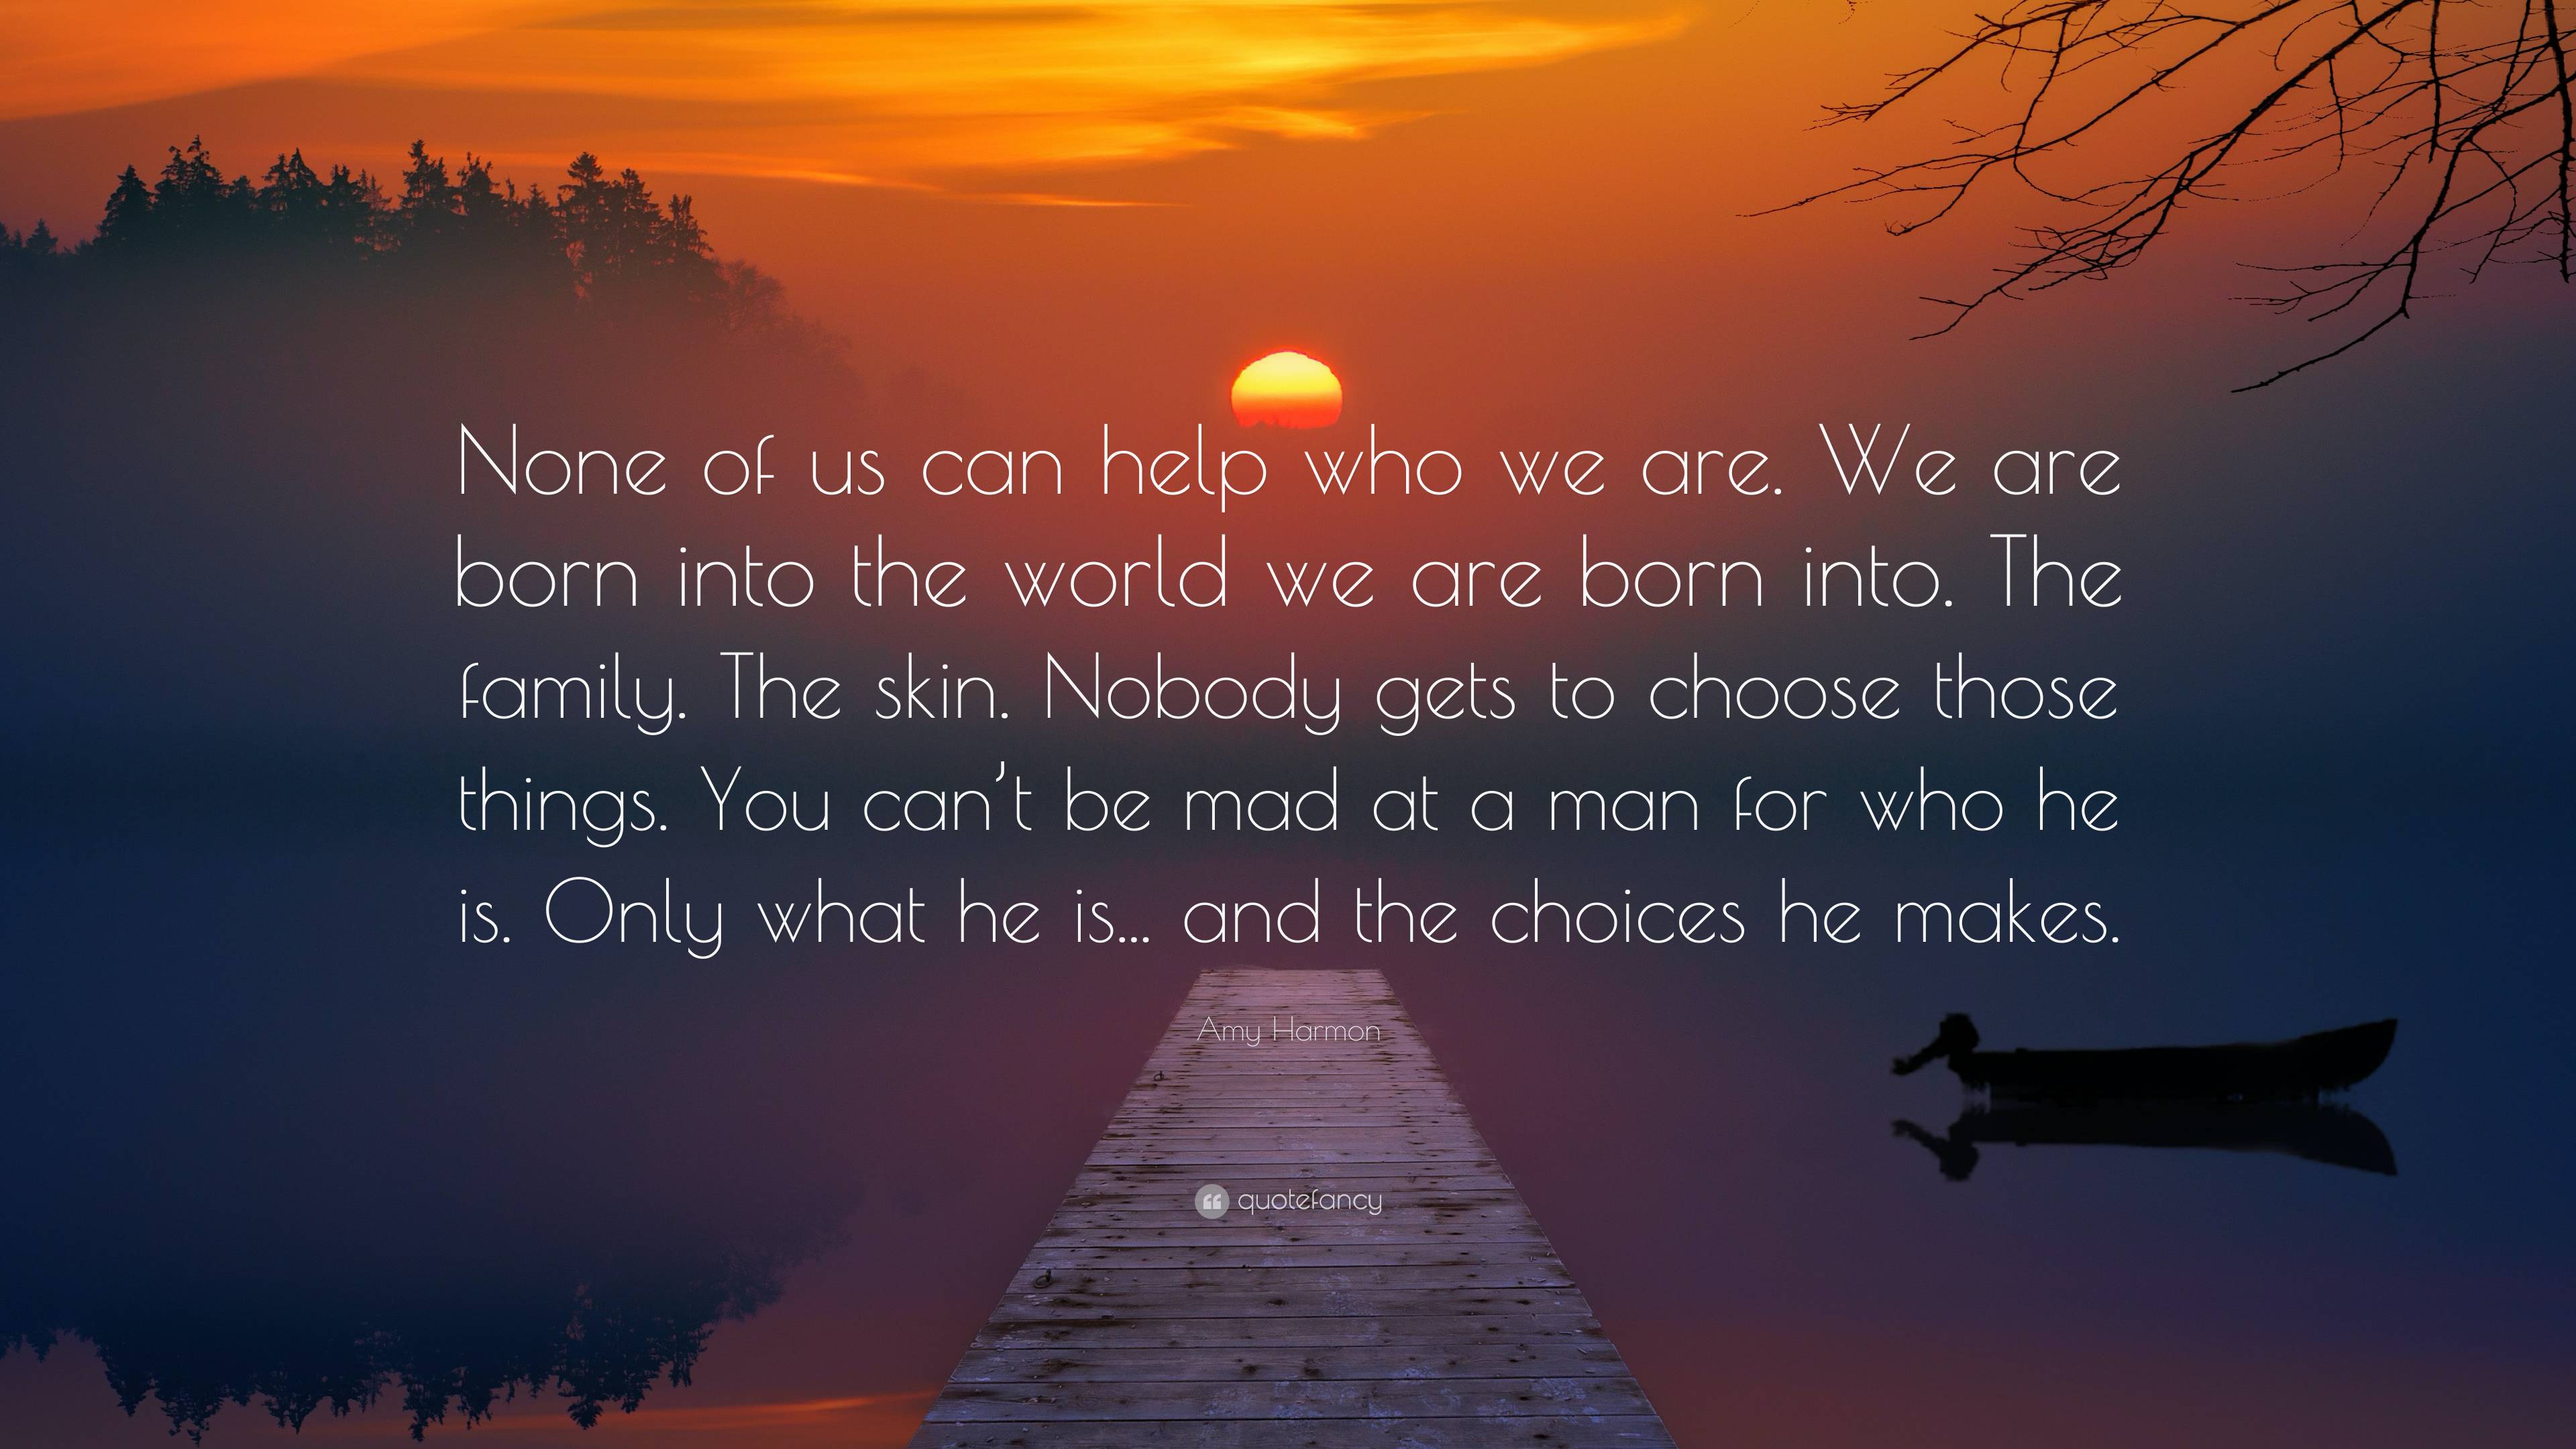 Amy Harmon Quote: “None of us can help who we are. We are born